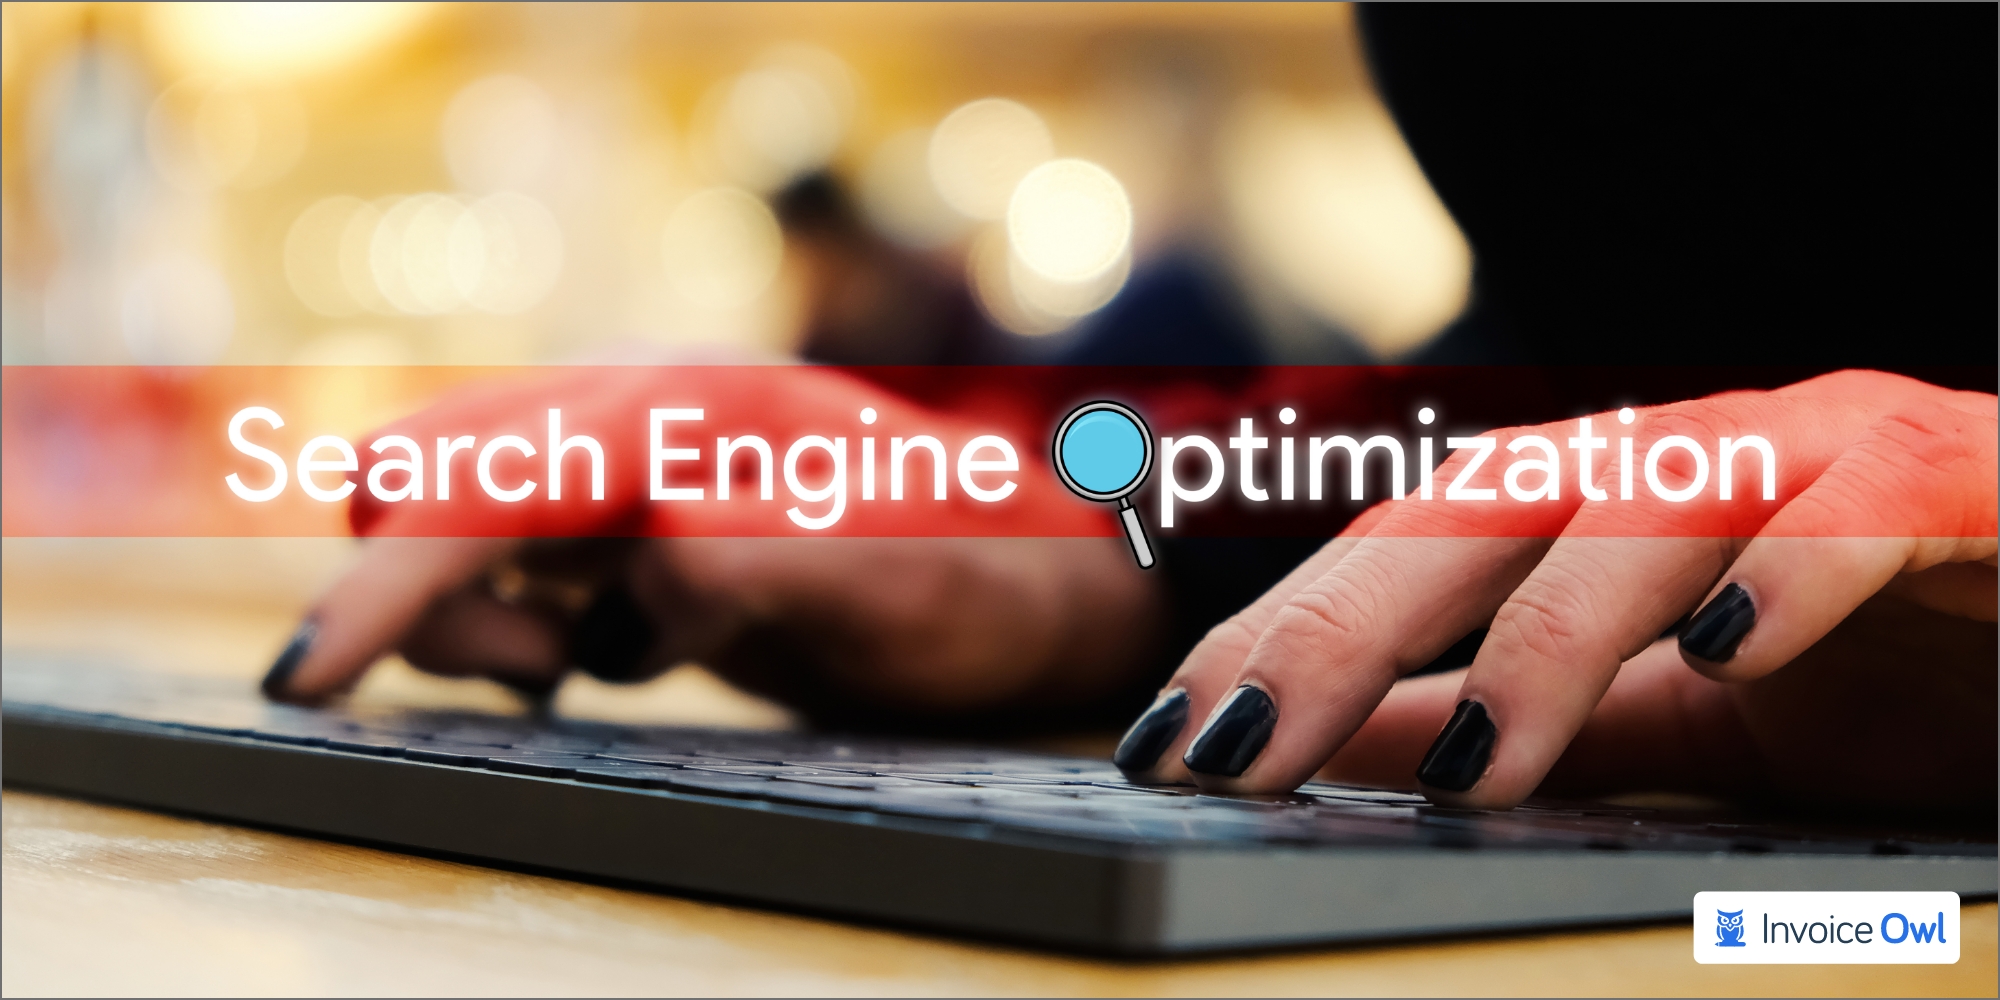 Optimize search engine